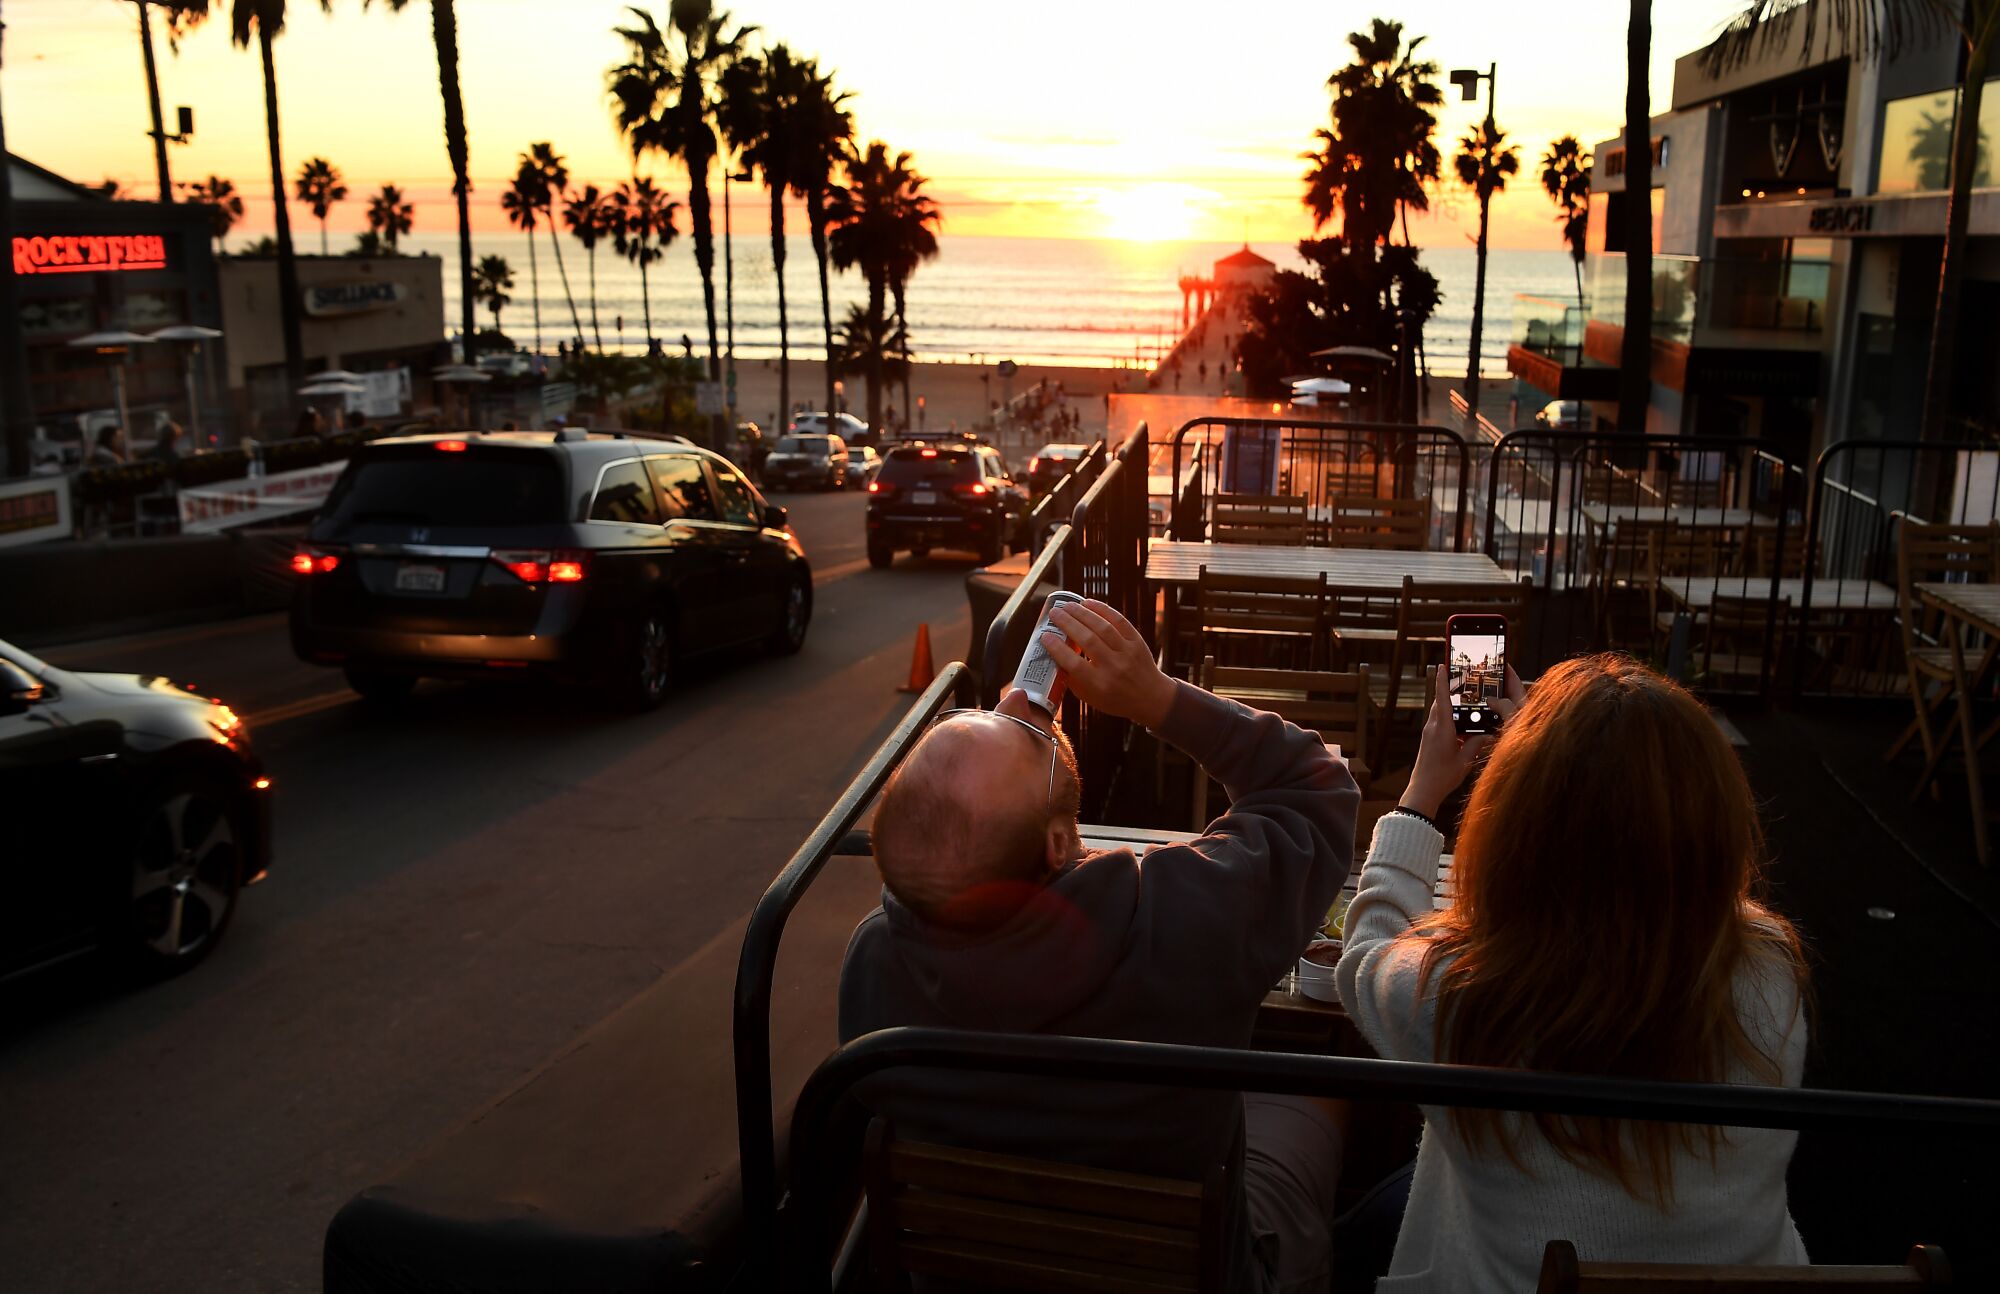 Bryan Yudko and his wife, Pam, enjoy a meal and the view in Manhattan Beach recently as a new shutdown loomed in L.A. County.